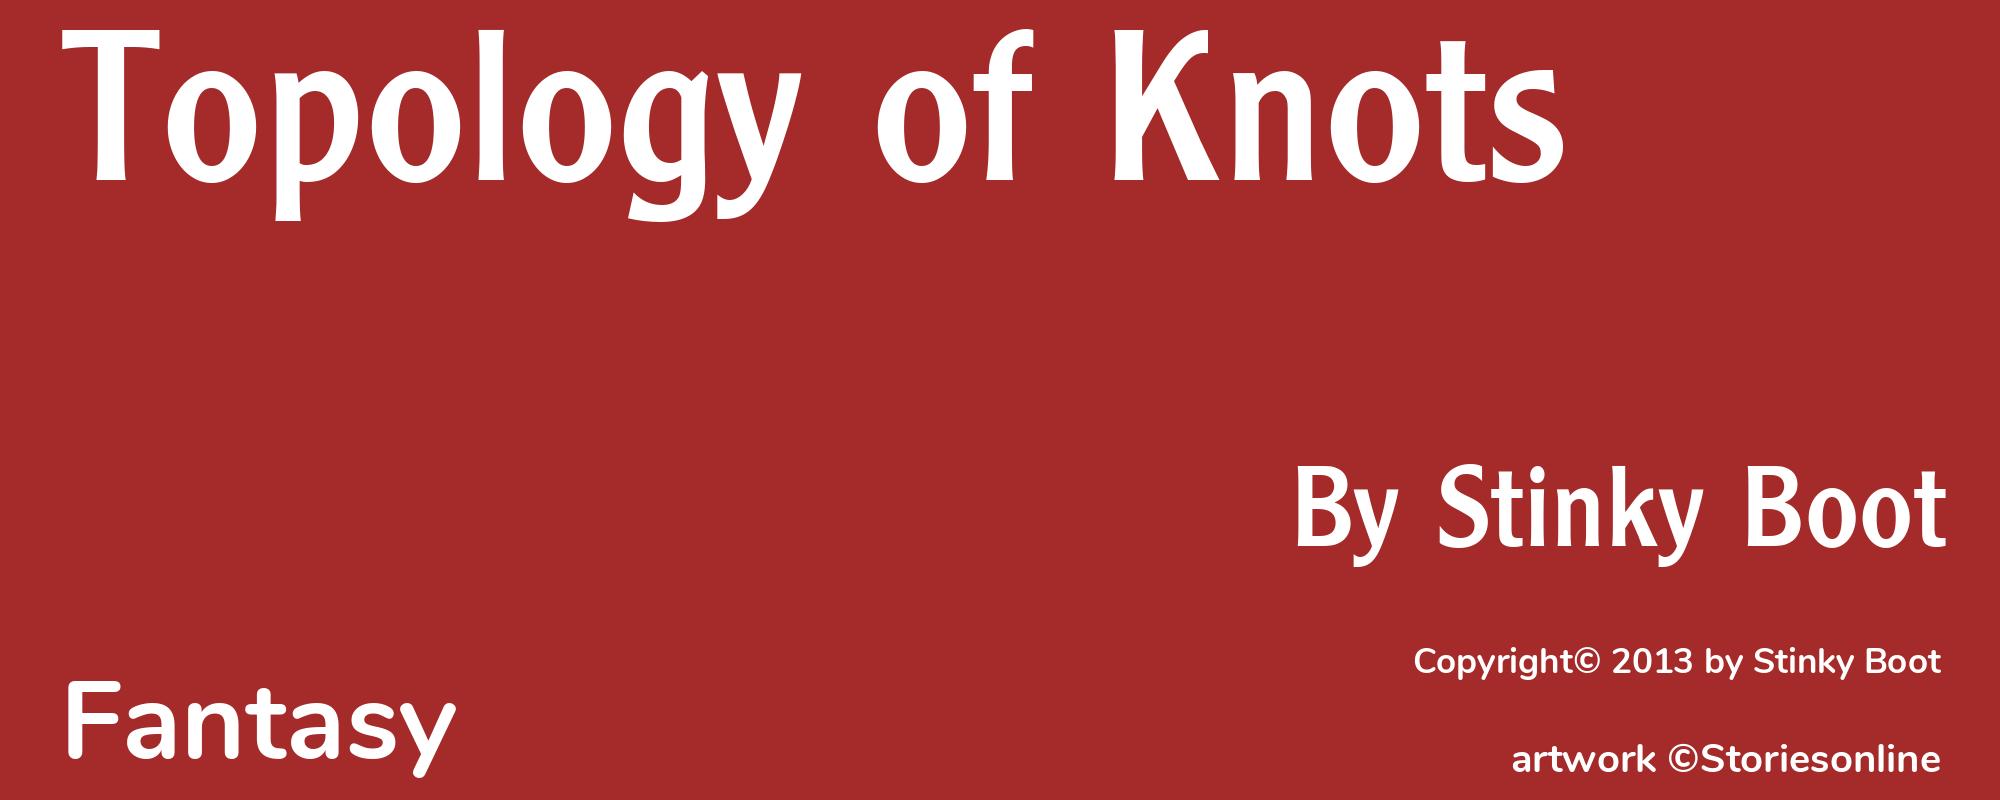 Topology of Knots - Cover